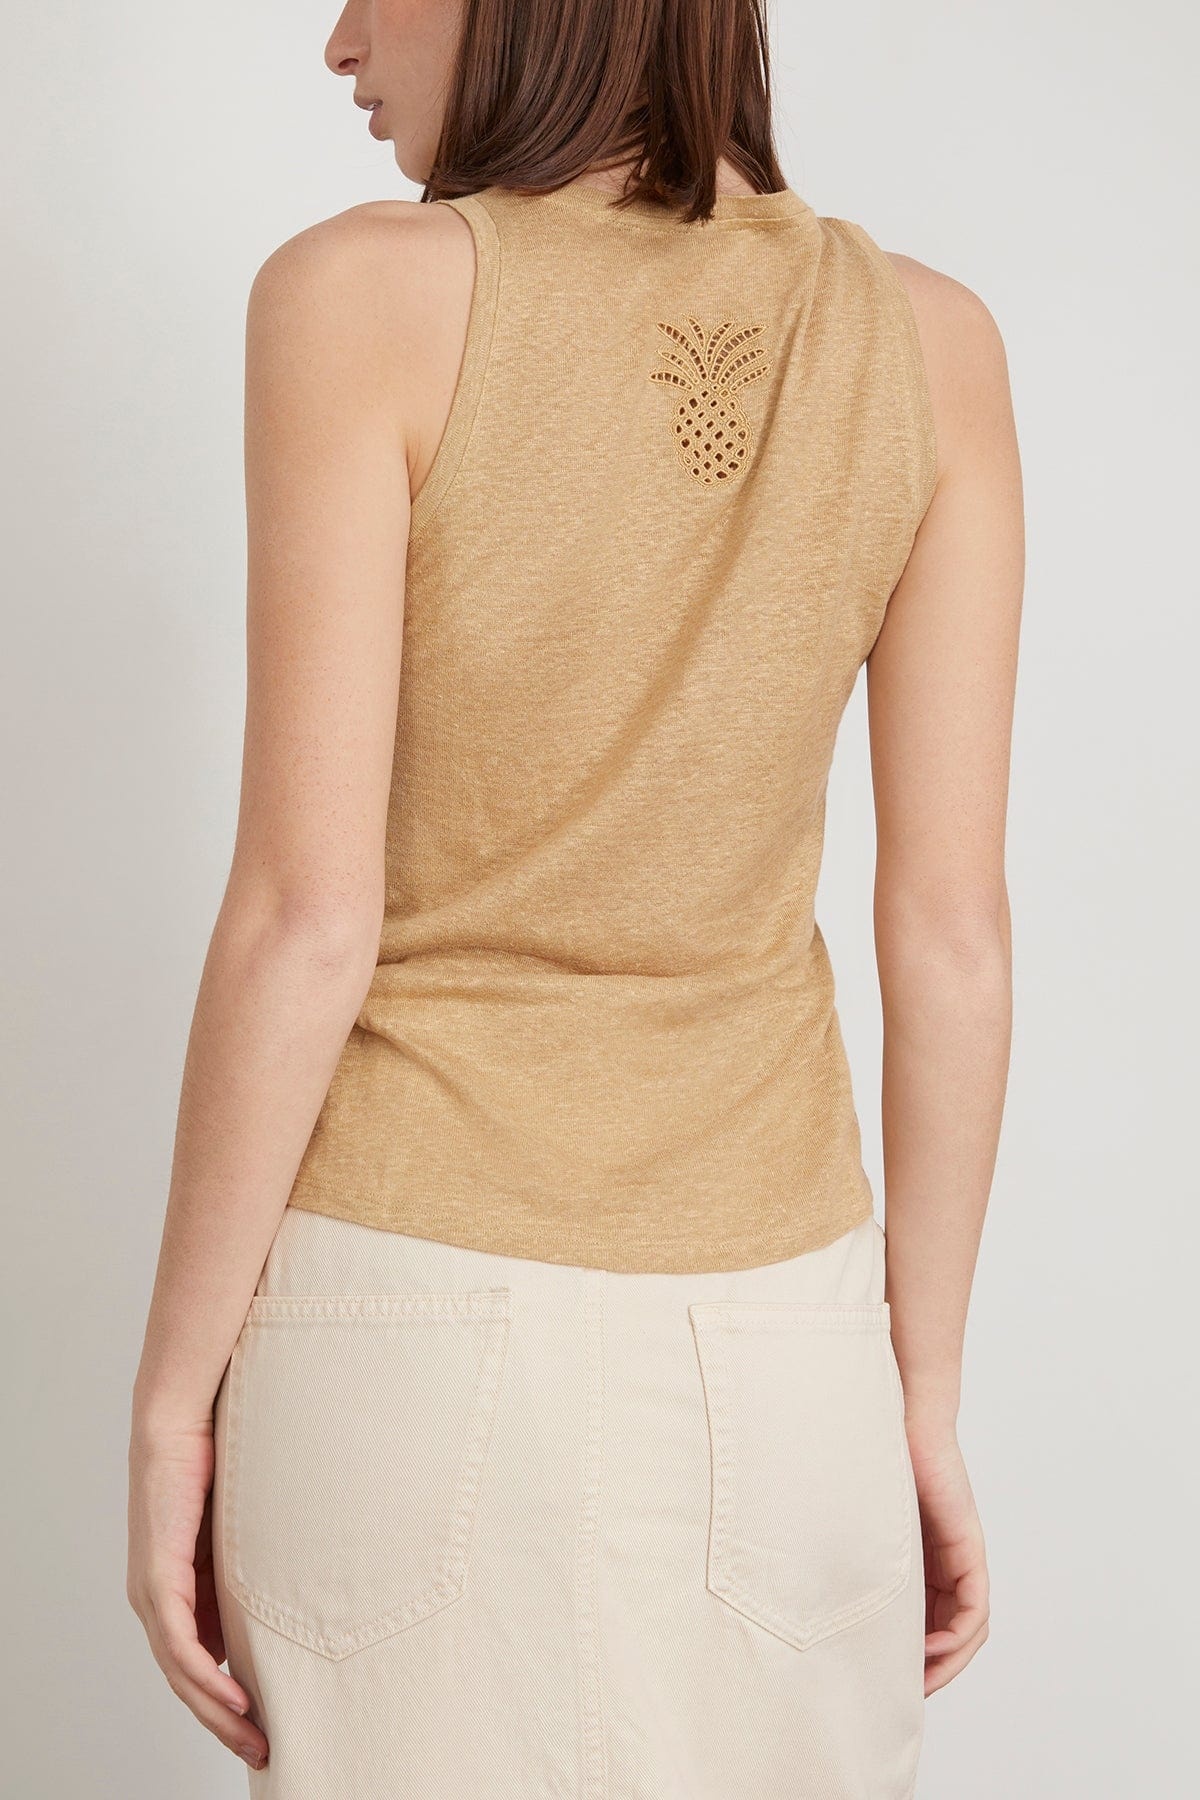 Natural Ease Sleeveless Top in Shimmering Gold - 4